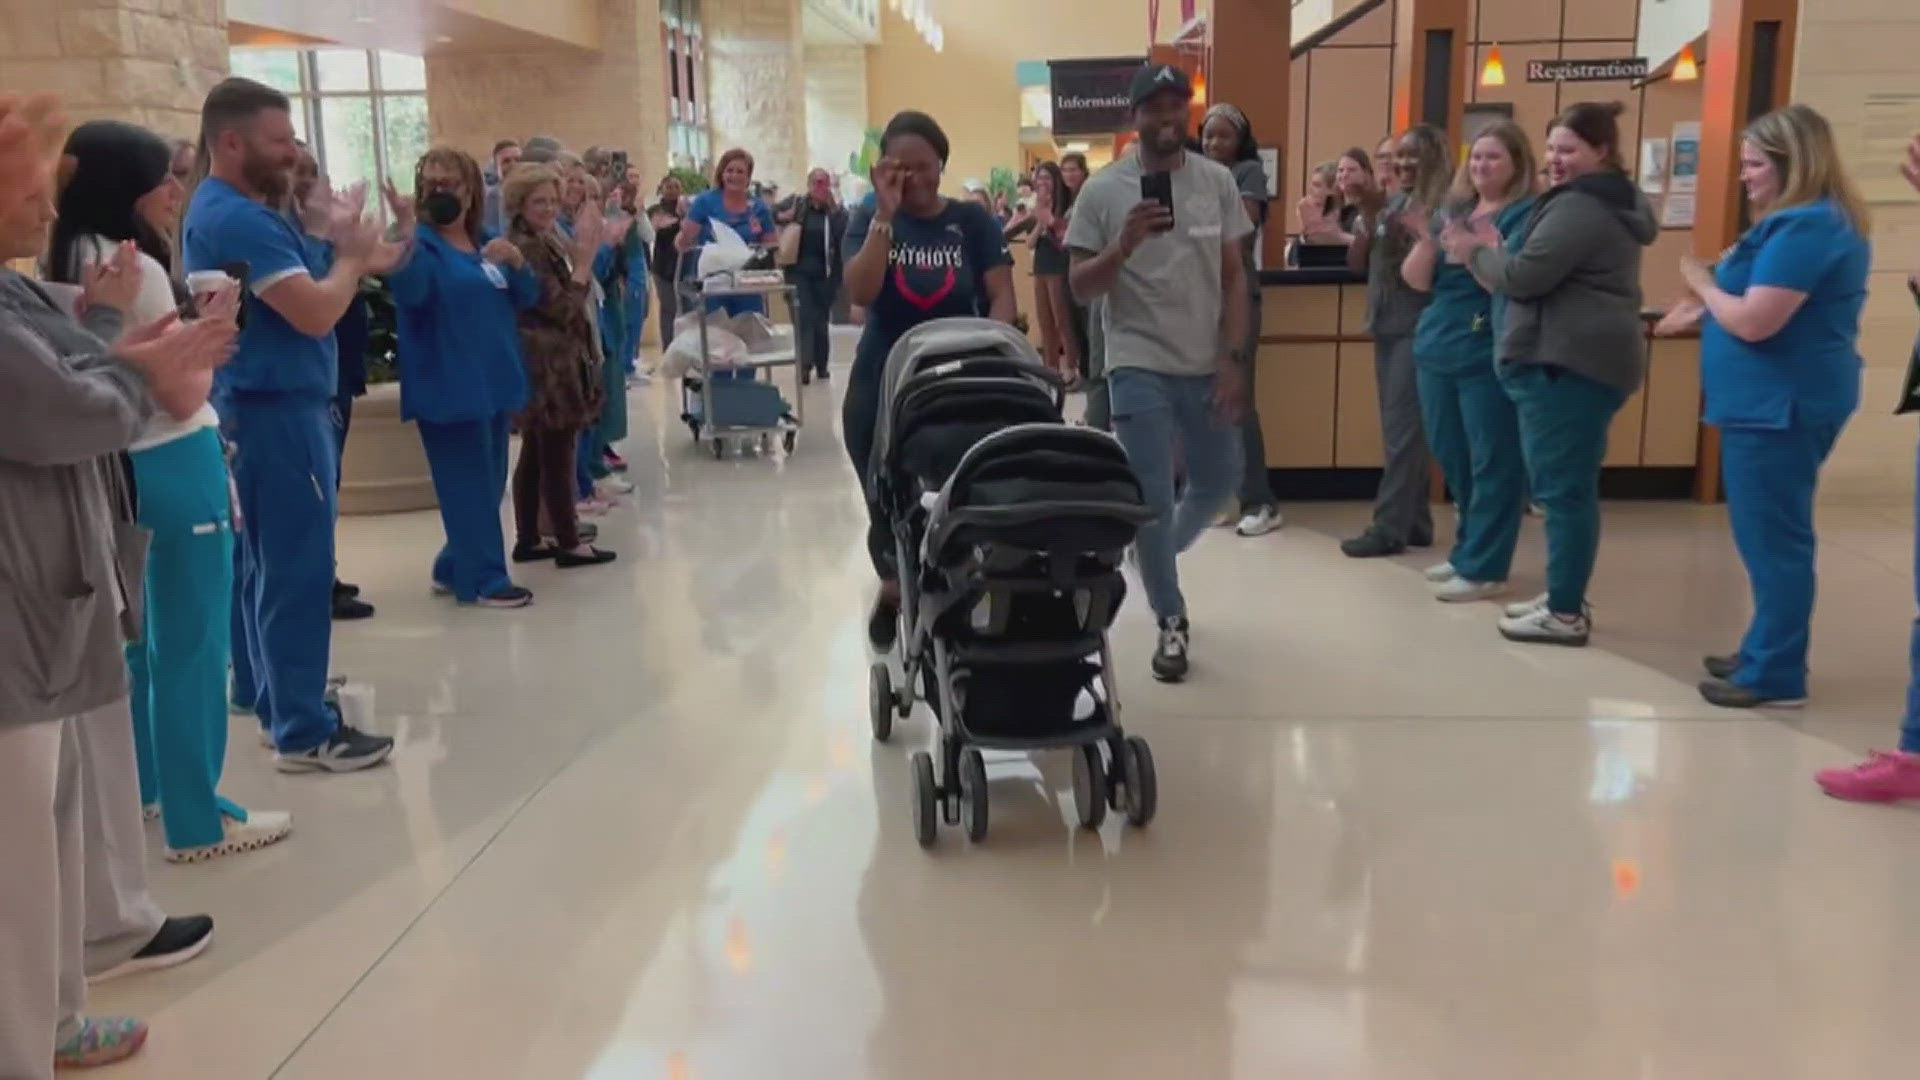 The baby was born 5 months ago and is finally getting to go home for the first time